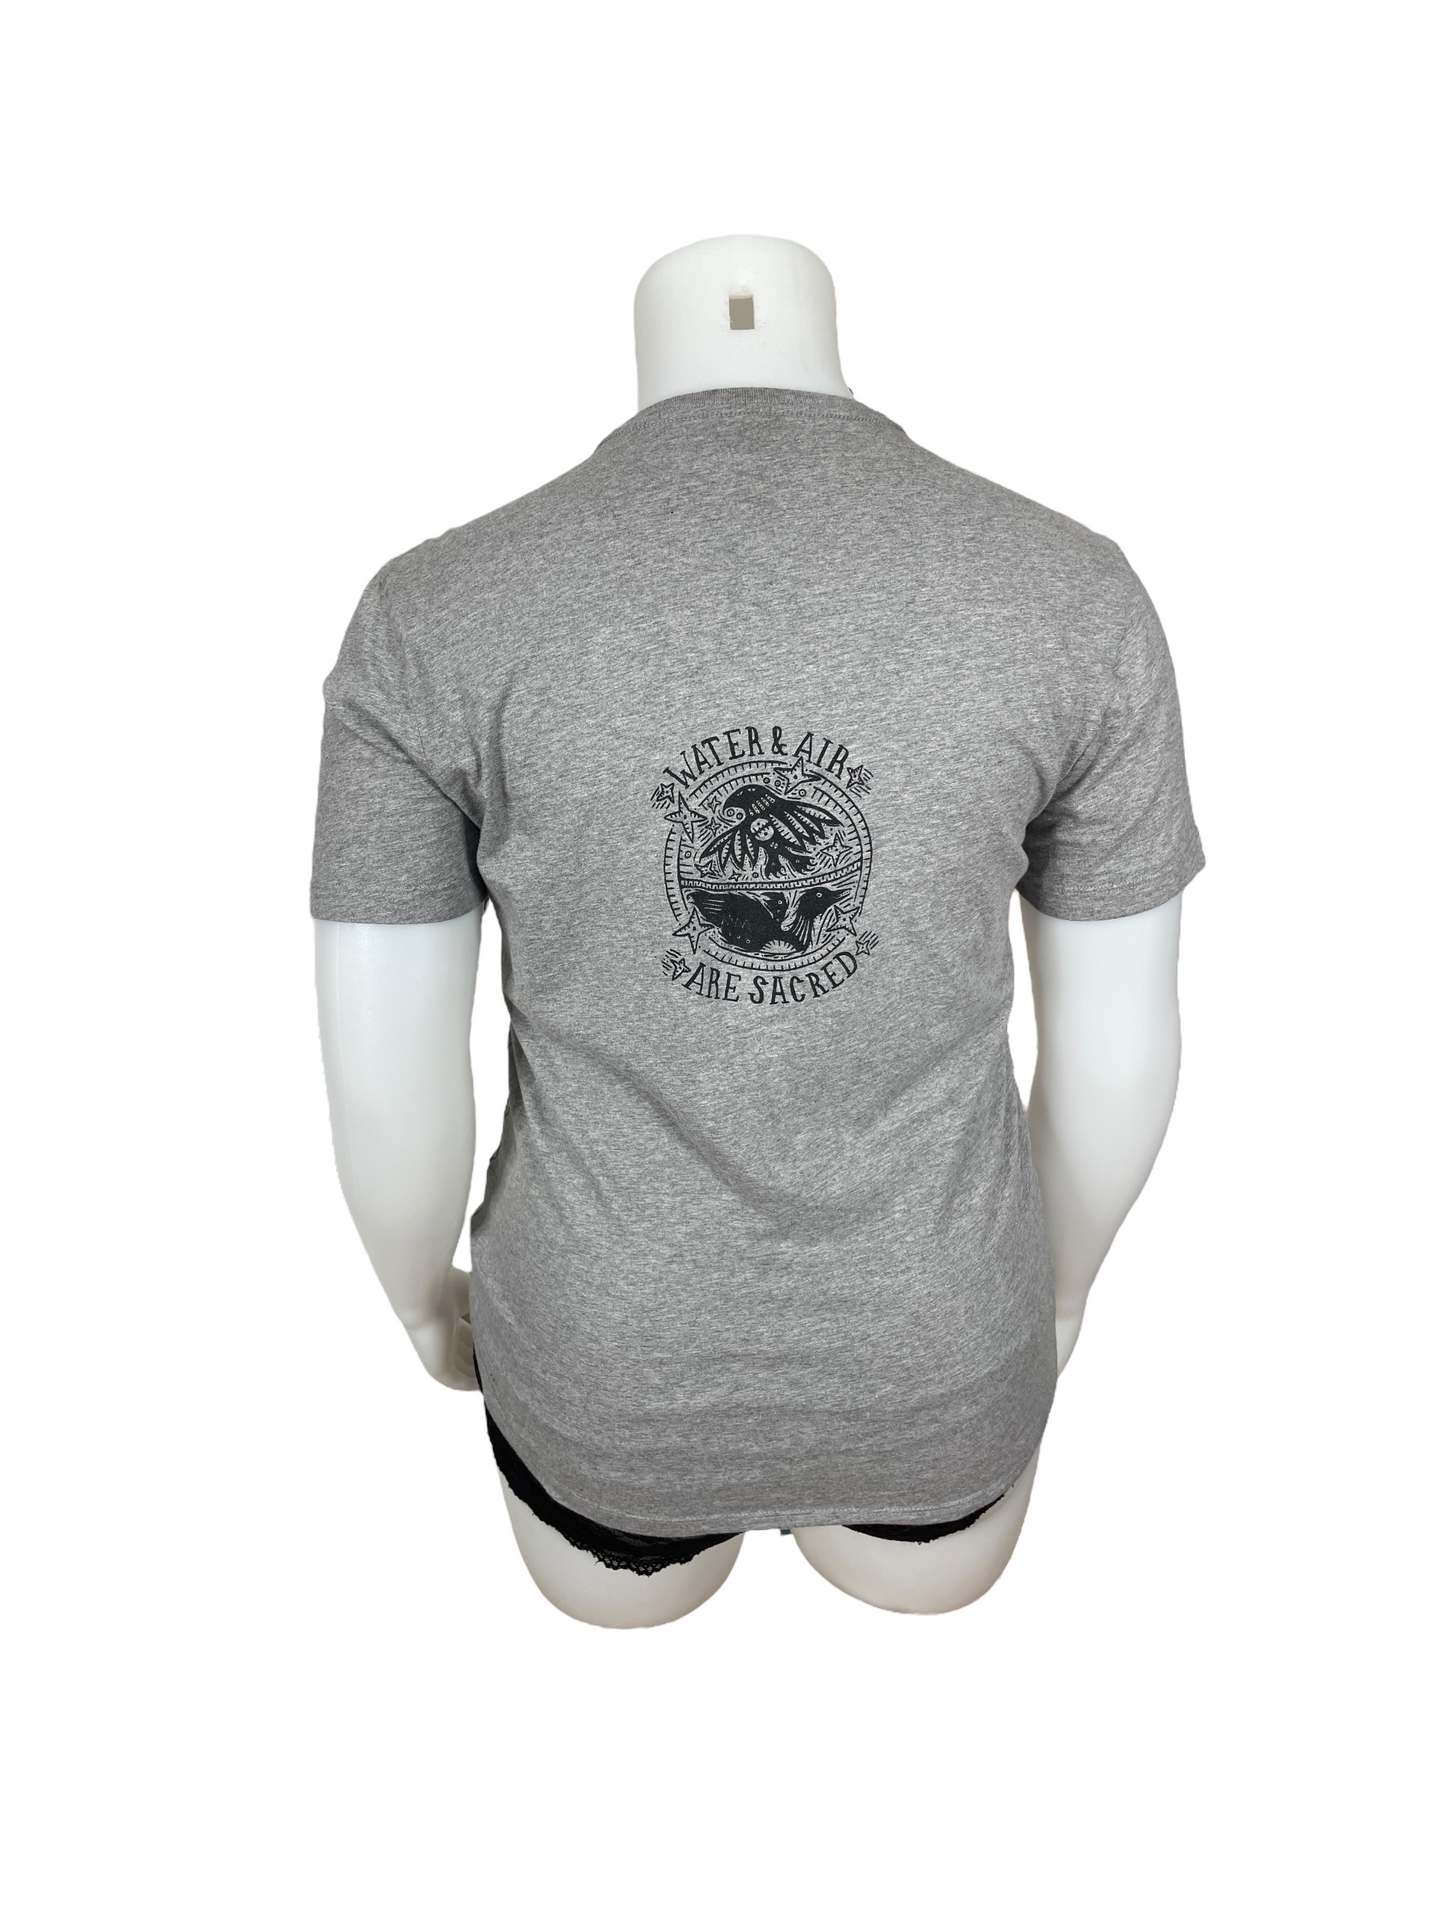 "Joe Fresh" Grey T shirt with 'Water & Air Are Sacred' design (L)